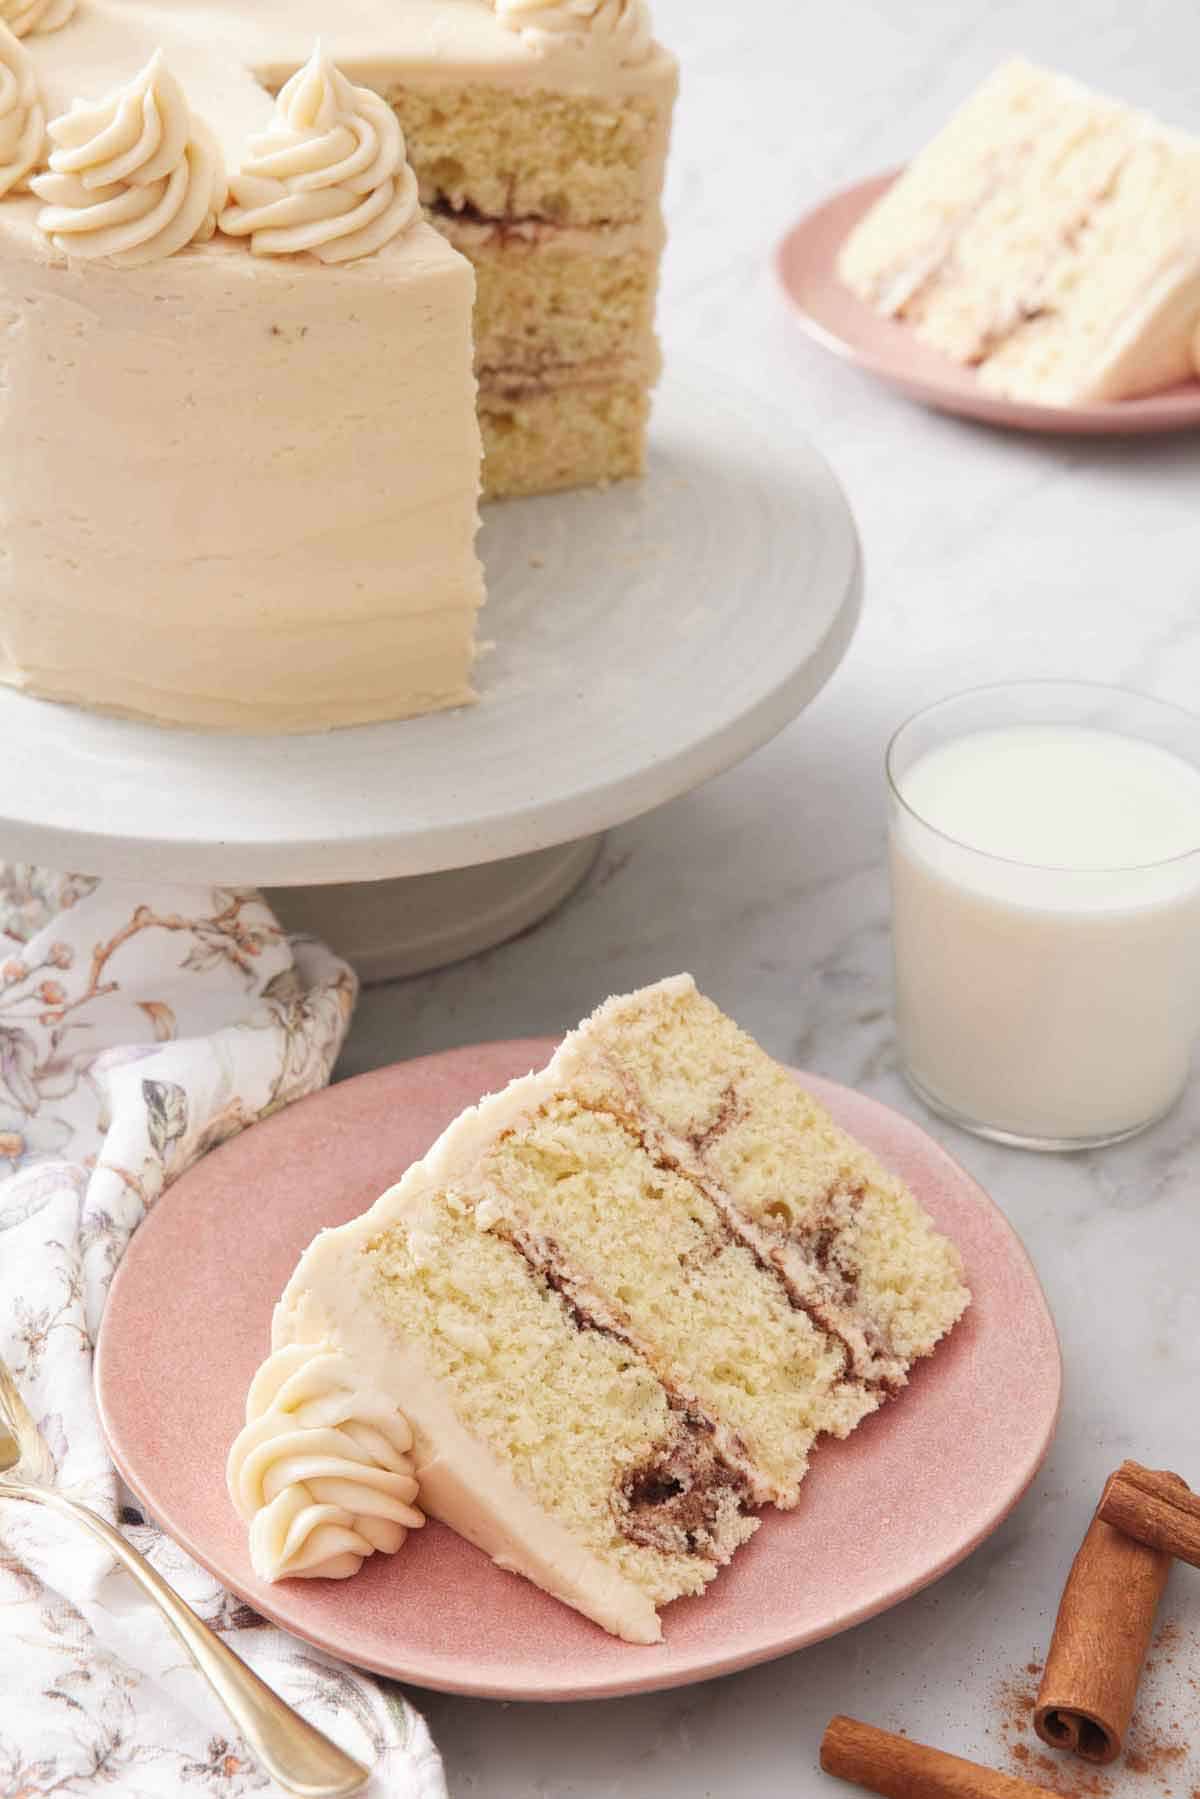 A slice of snickerdoodle cake with a glass of milk and the rest of the cake on a cake stand in the background.